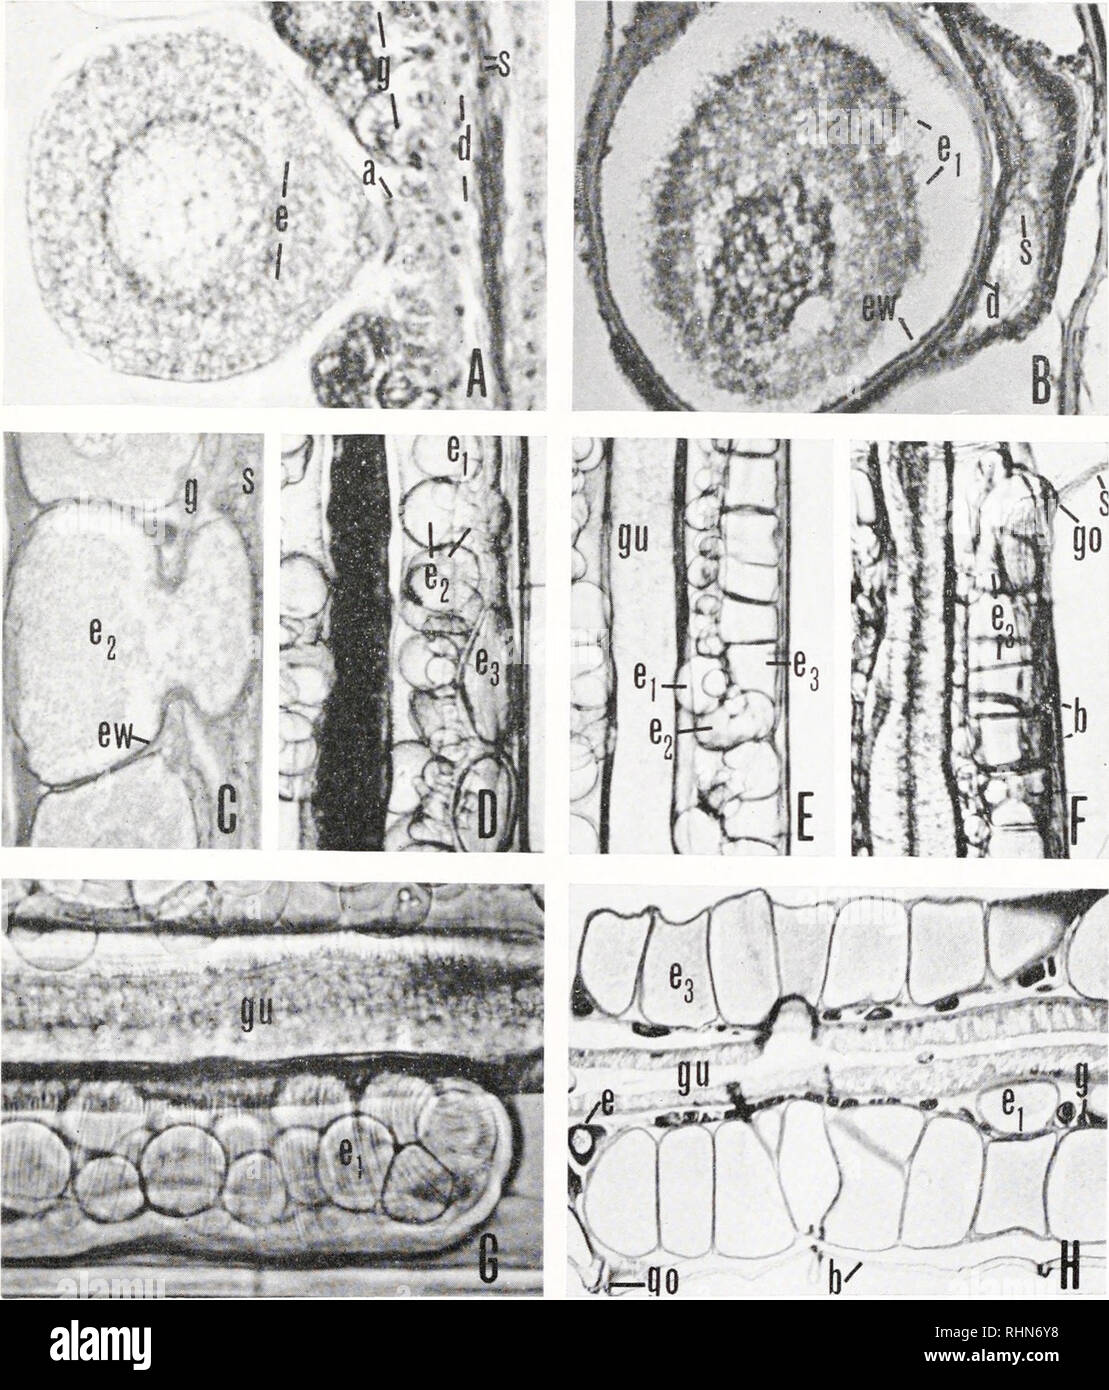 . The Biological bulletin. Biology; Zoology; Biology; Marine Biology. EGG-LAYING IN SAGITTA 249. FIGURE 1. A—maturing egg; B—mature egg; C to F—stages in migration of egg to duct; G—ovary with mature unmigrated eggs showing contractions of ovary walls; H—eggs in duct immediately prior to laying. Figures A-C and H are from sections, D-G from live material; width of body approximately 0.5 mm ; a—accessory fertilization cells; b—body wall; d—duct; e—maturing egg; ei—mature unmigrated egg; 62—migrating egg; e3—migrated egg; cw—egg cell wall; g—germinal epithelium; go—gonopore ; gu—gut; s—sperm.. P Stock Photo